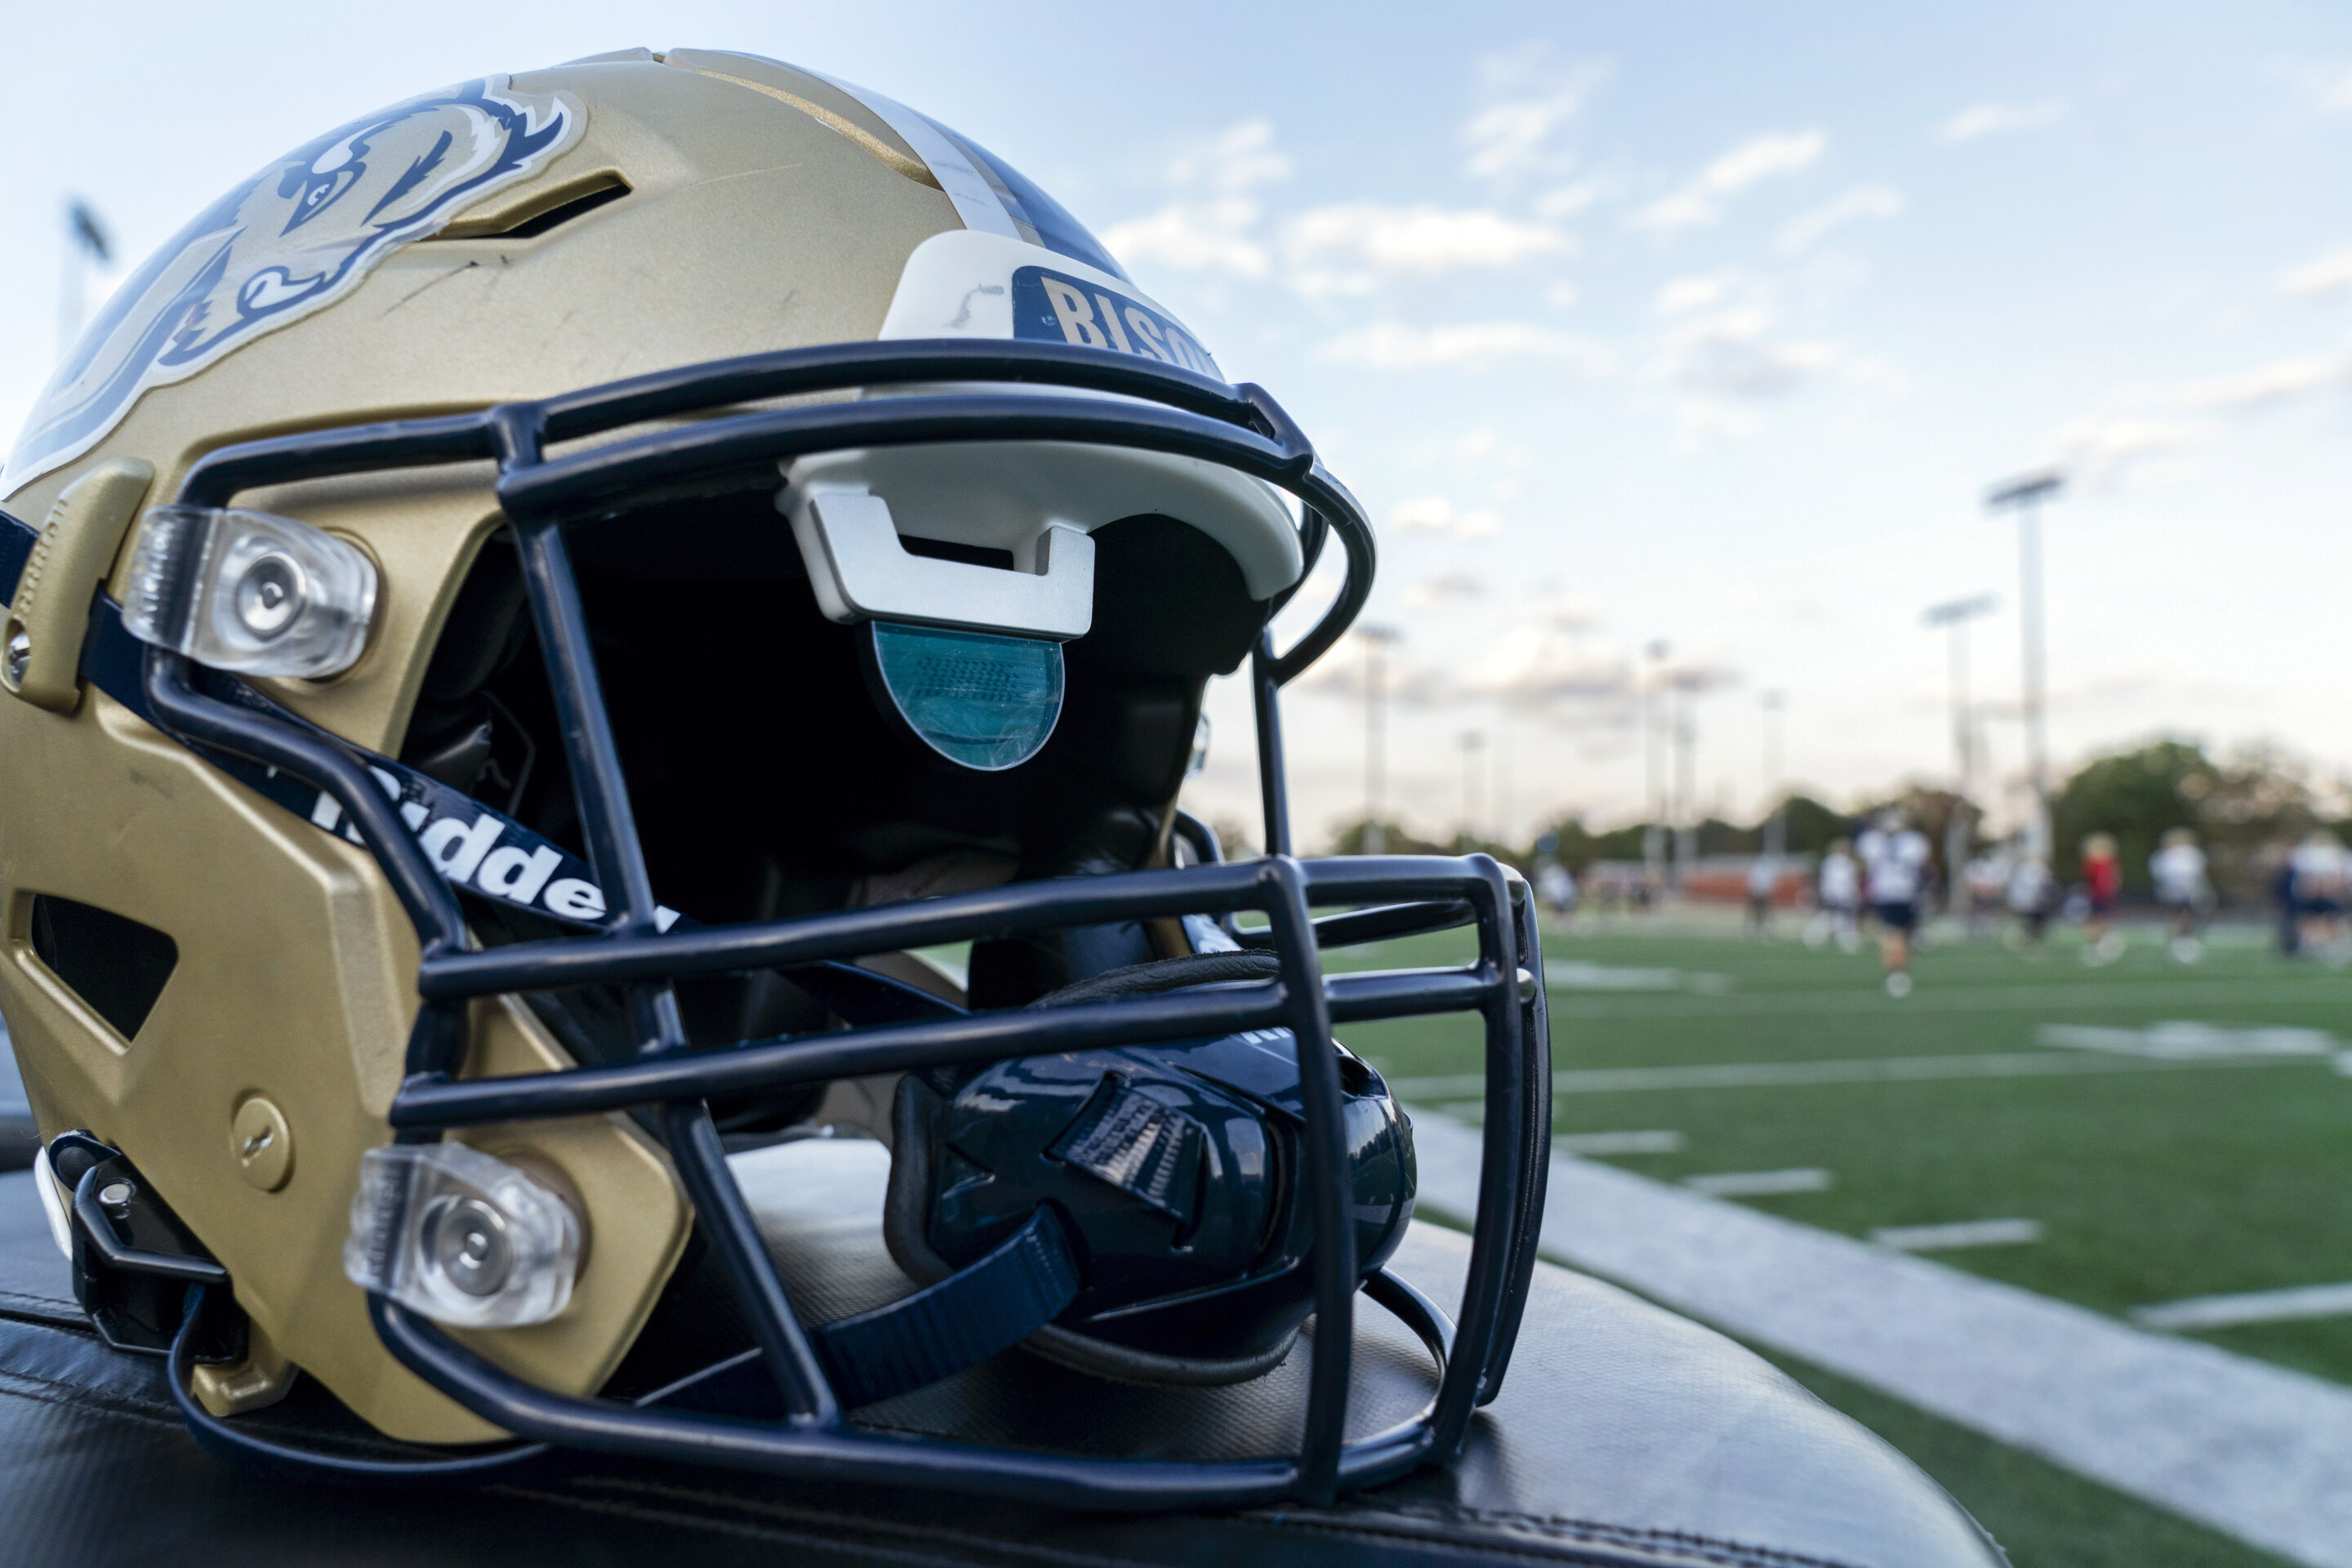 AT&T unveils 5G-connected football helmet to enhance communication